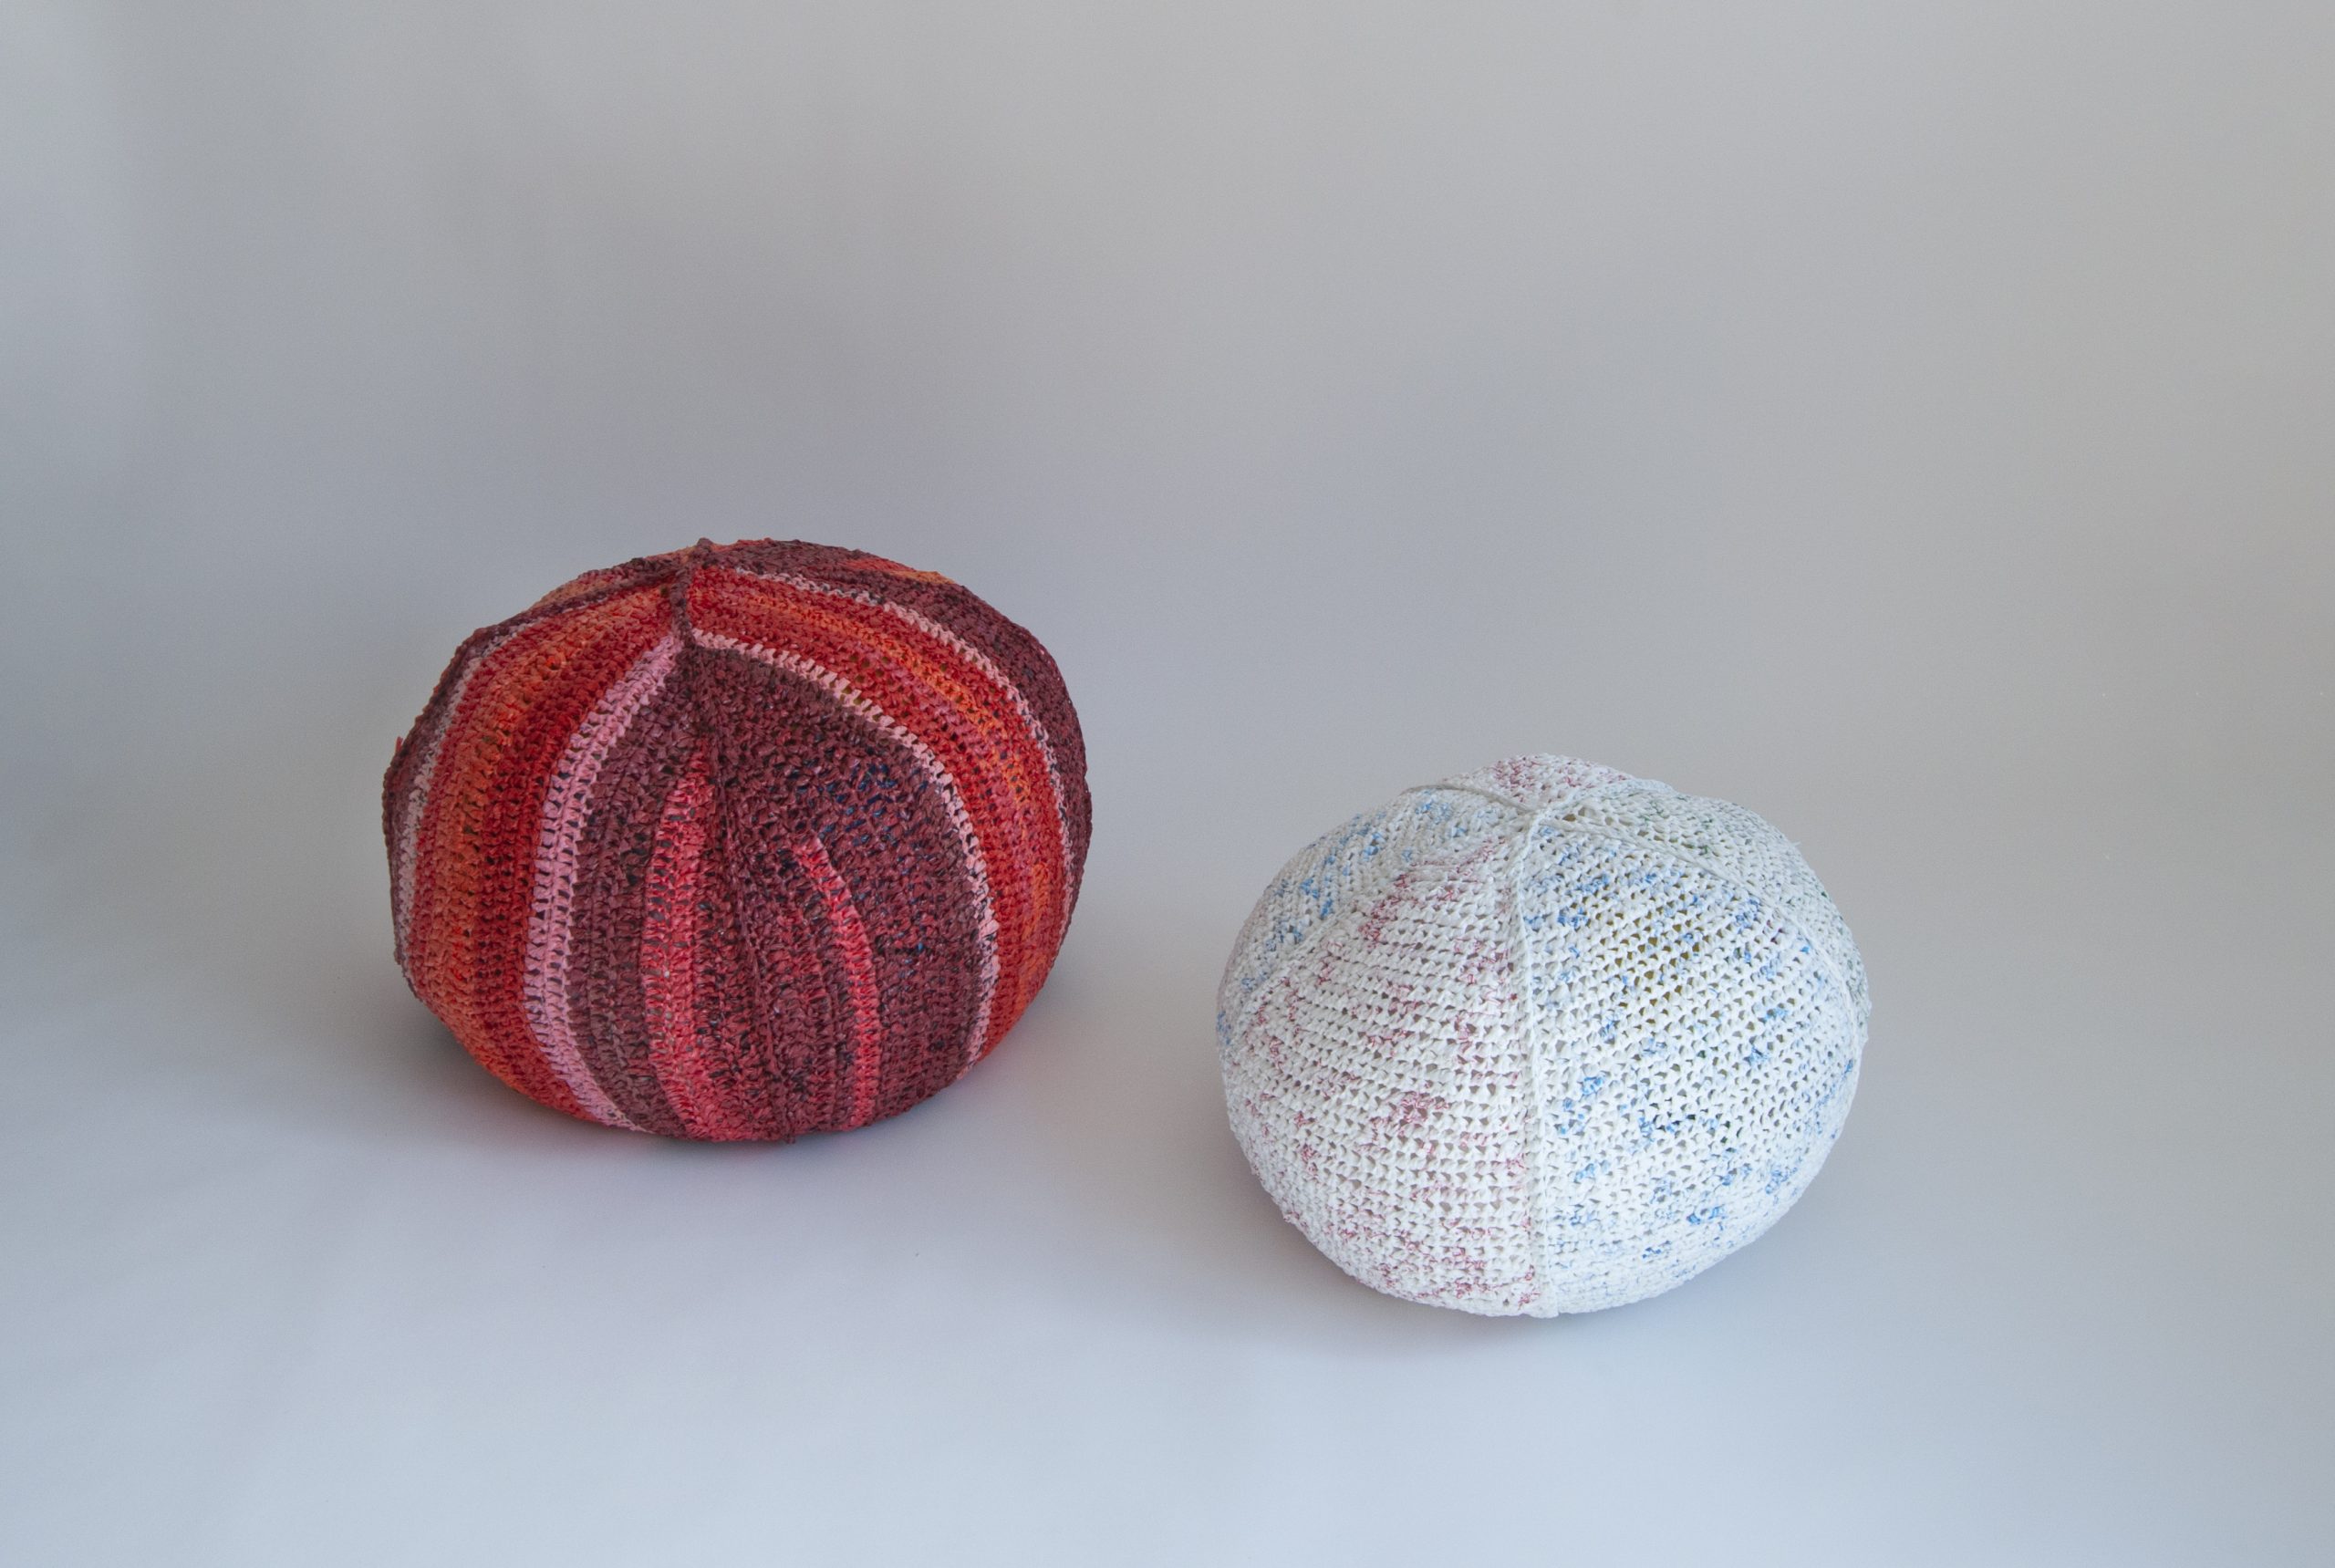 Two knitted poufs made of plarn on a white surface.